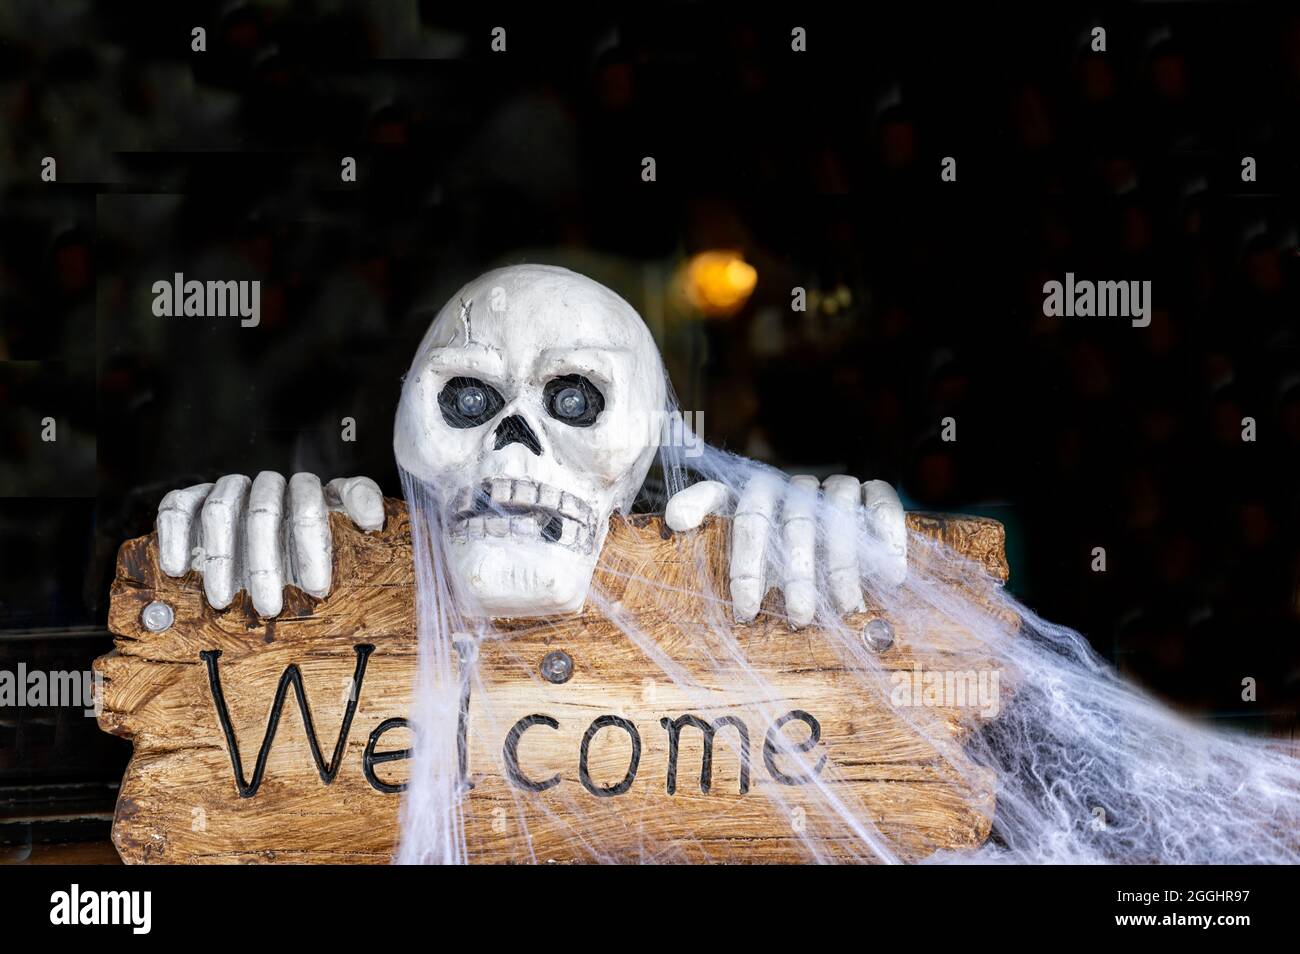 Wood sign with word 'Welcome'. Skull with spider web. Halloween event. Holidays. Stock Photo